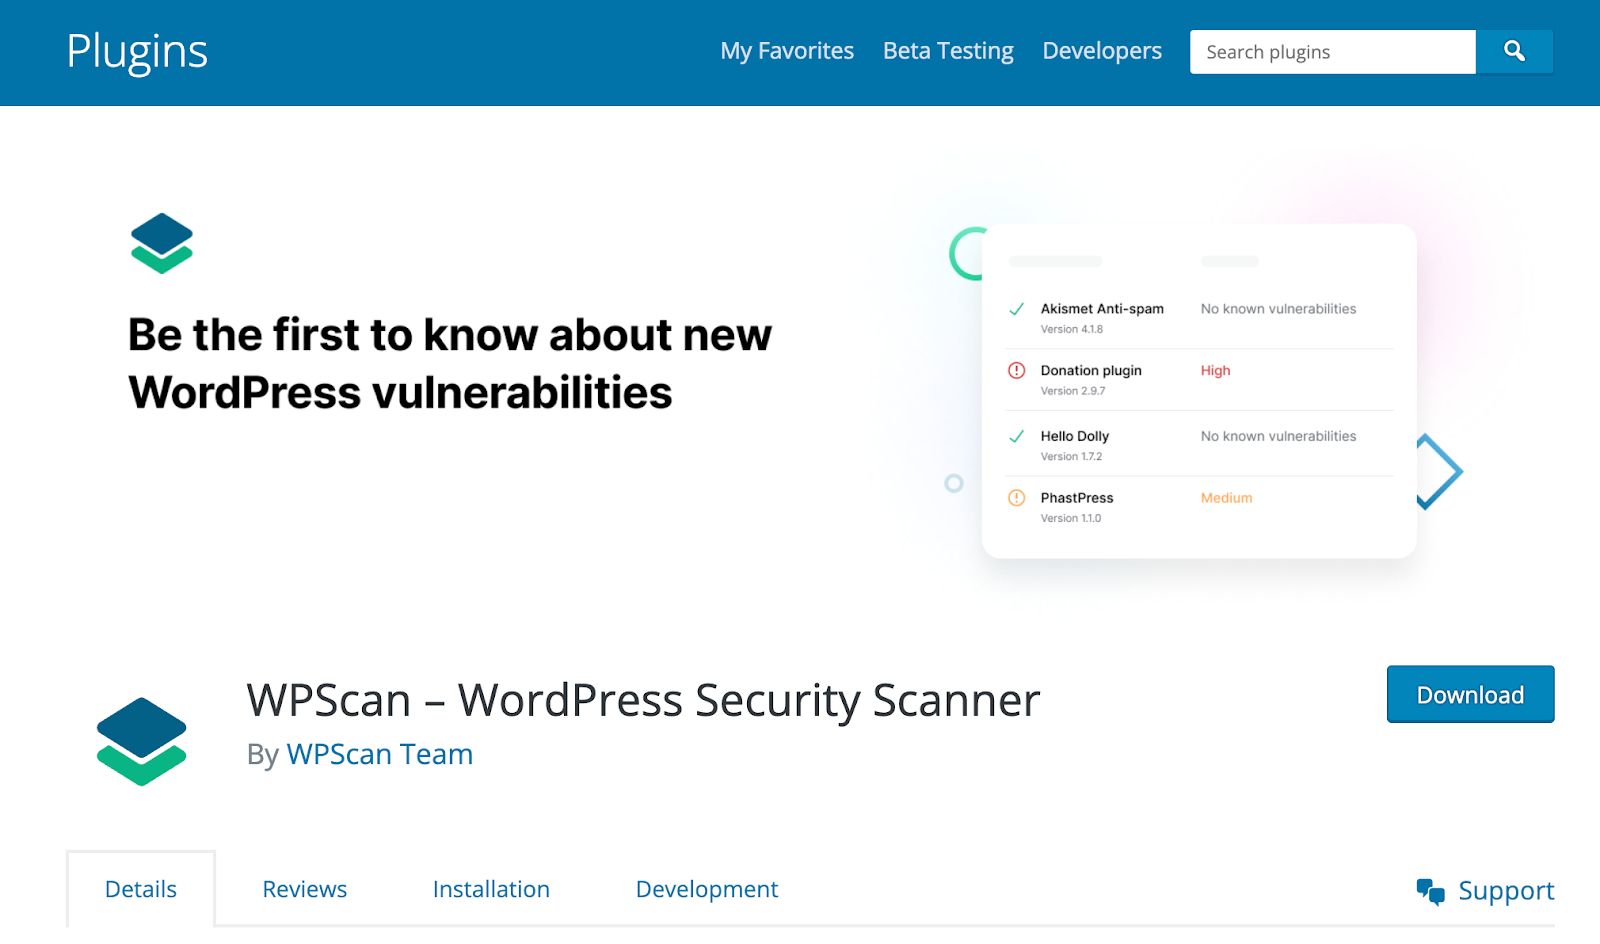 WPScan – Plugin Security Scanner can help you check if a WordPress plugin is safe.